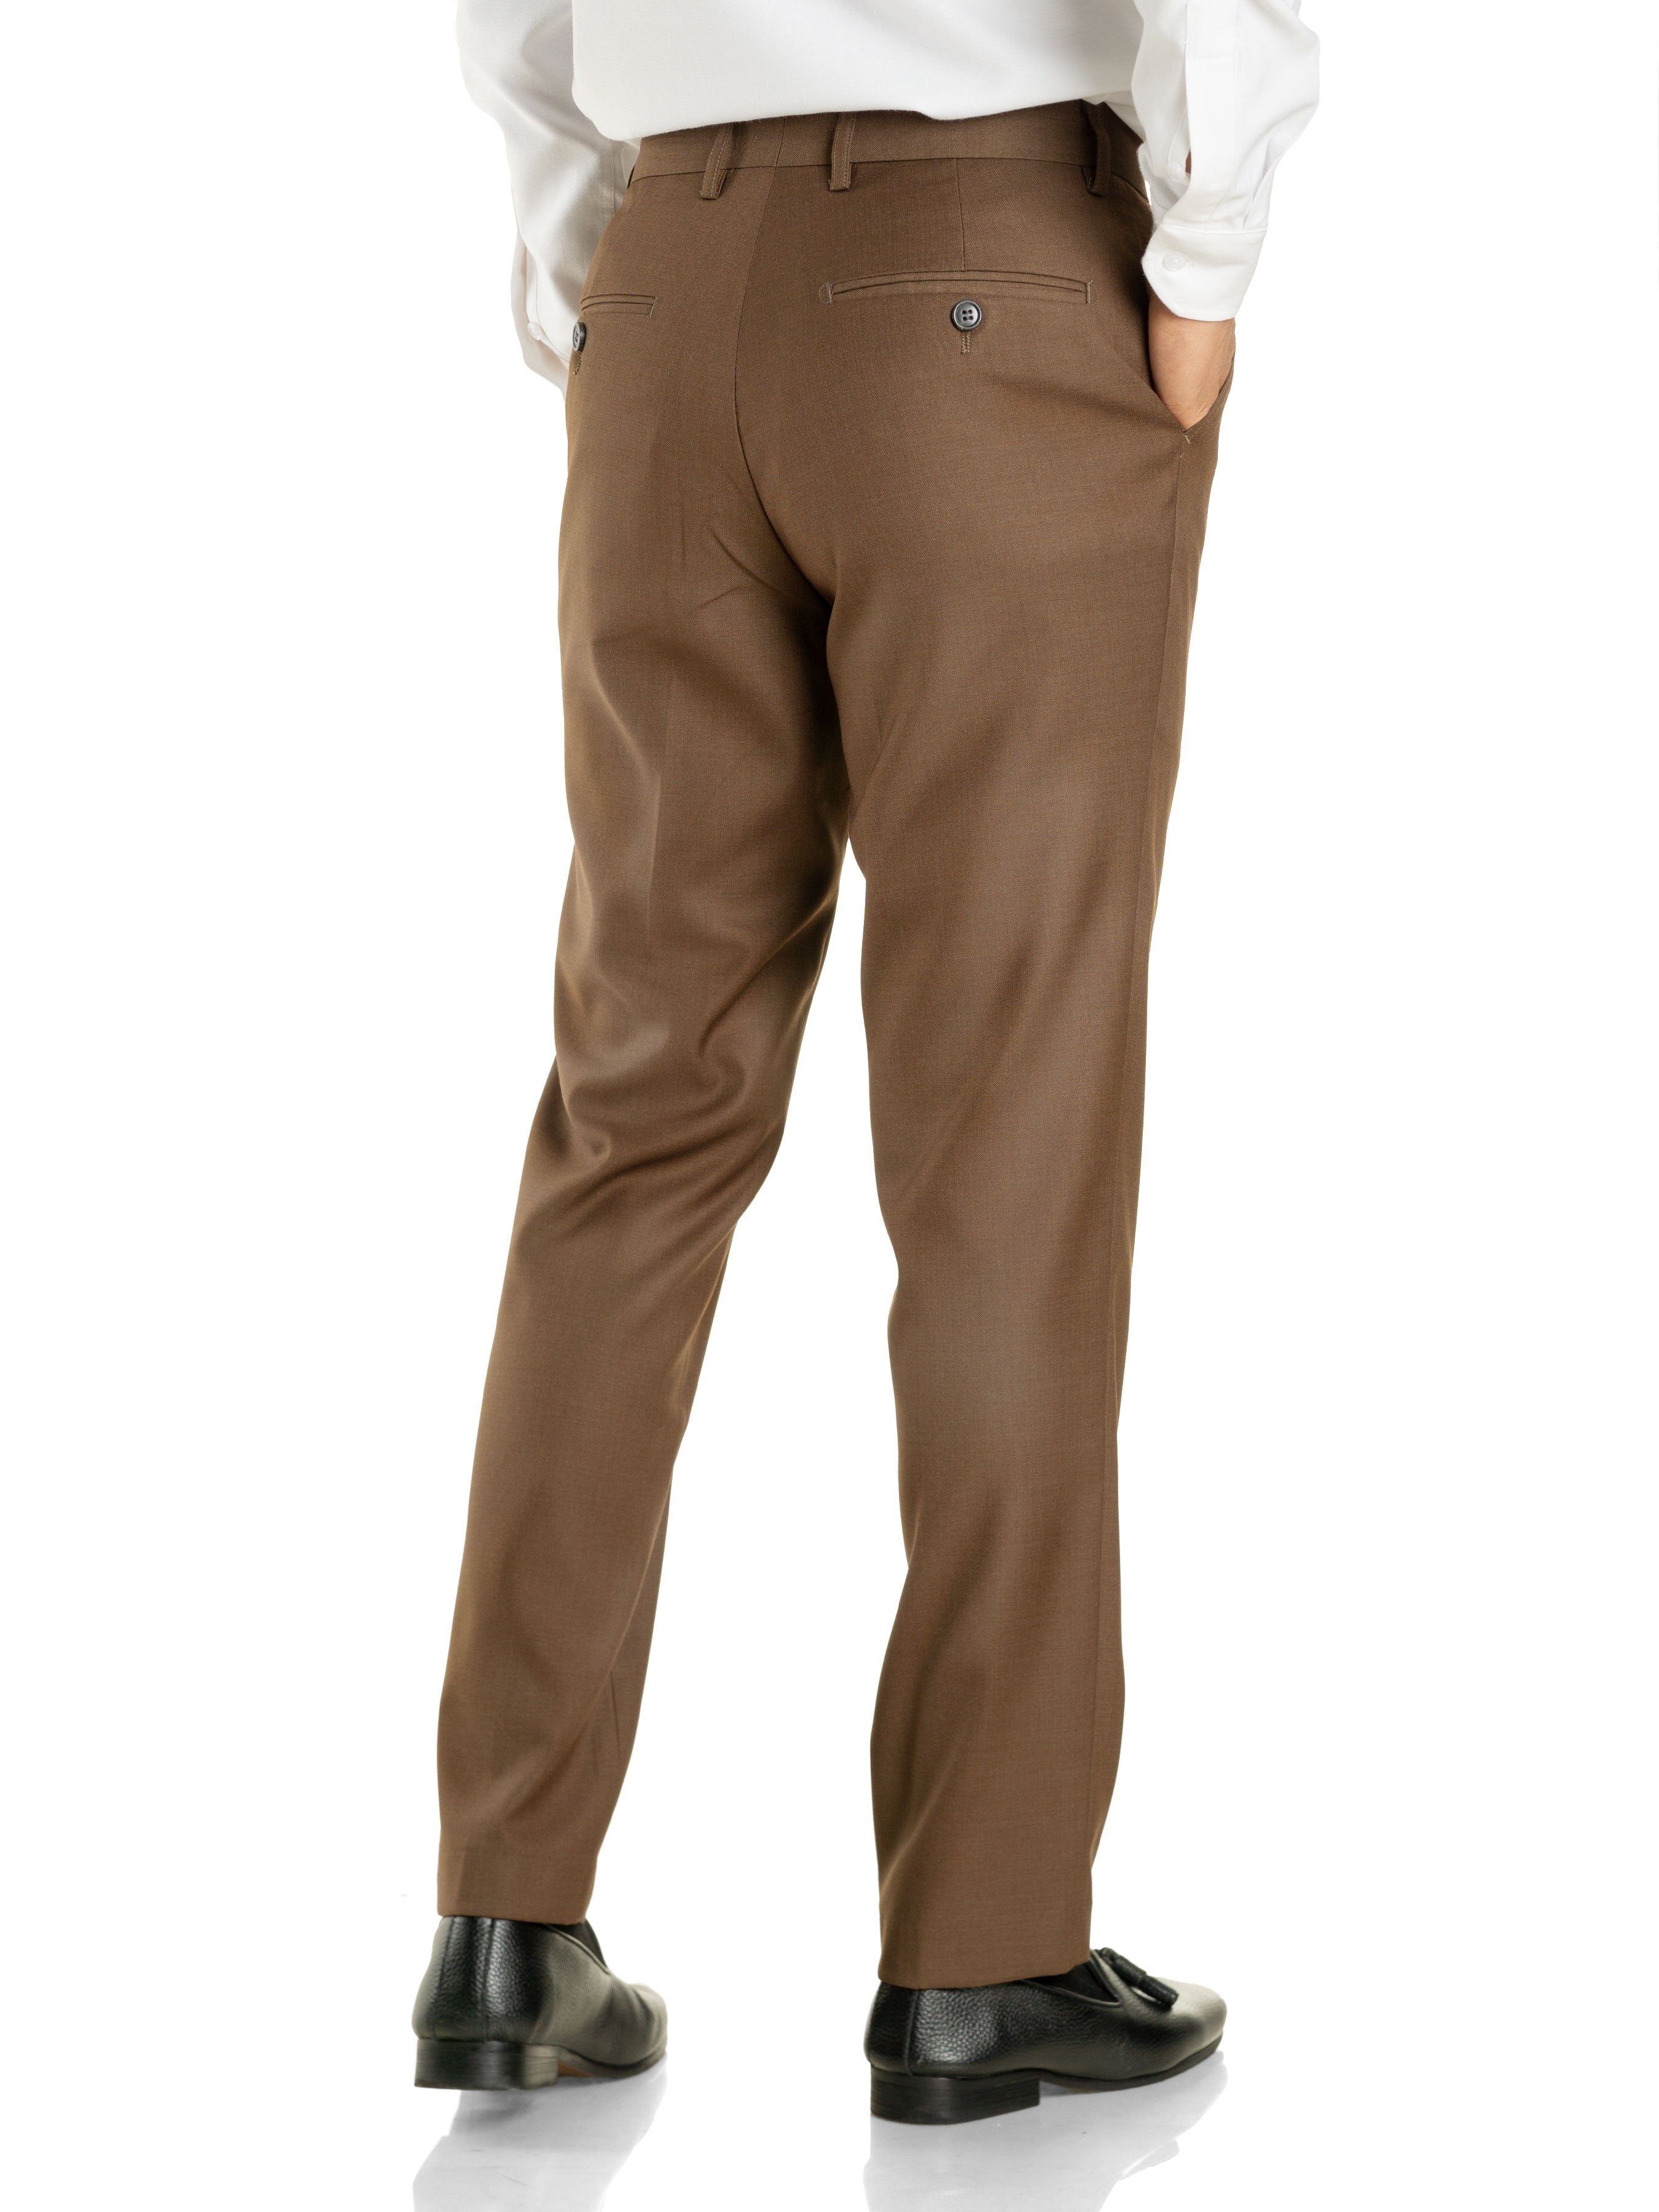 Trousers With Belt Loop - Mocha Brown Plain (Stretchable) - Zeve Shoes